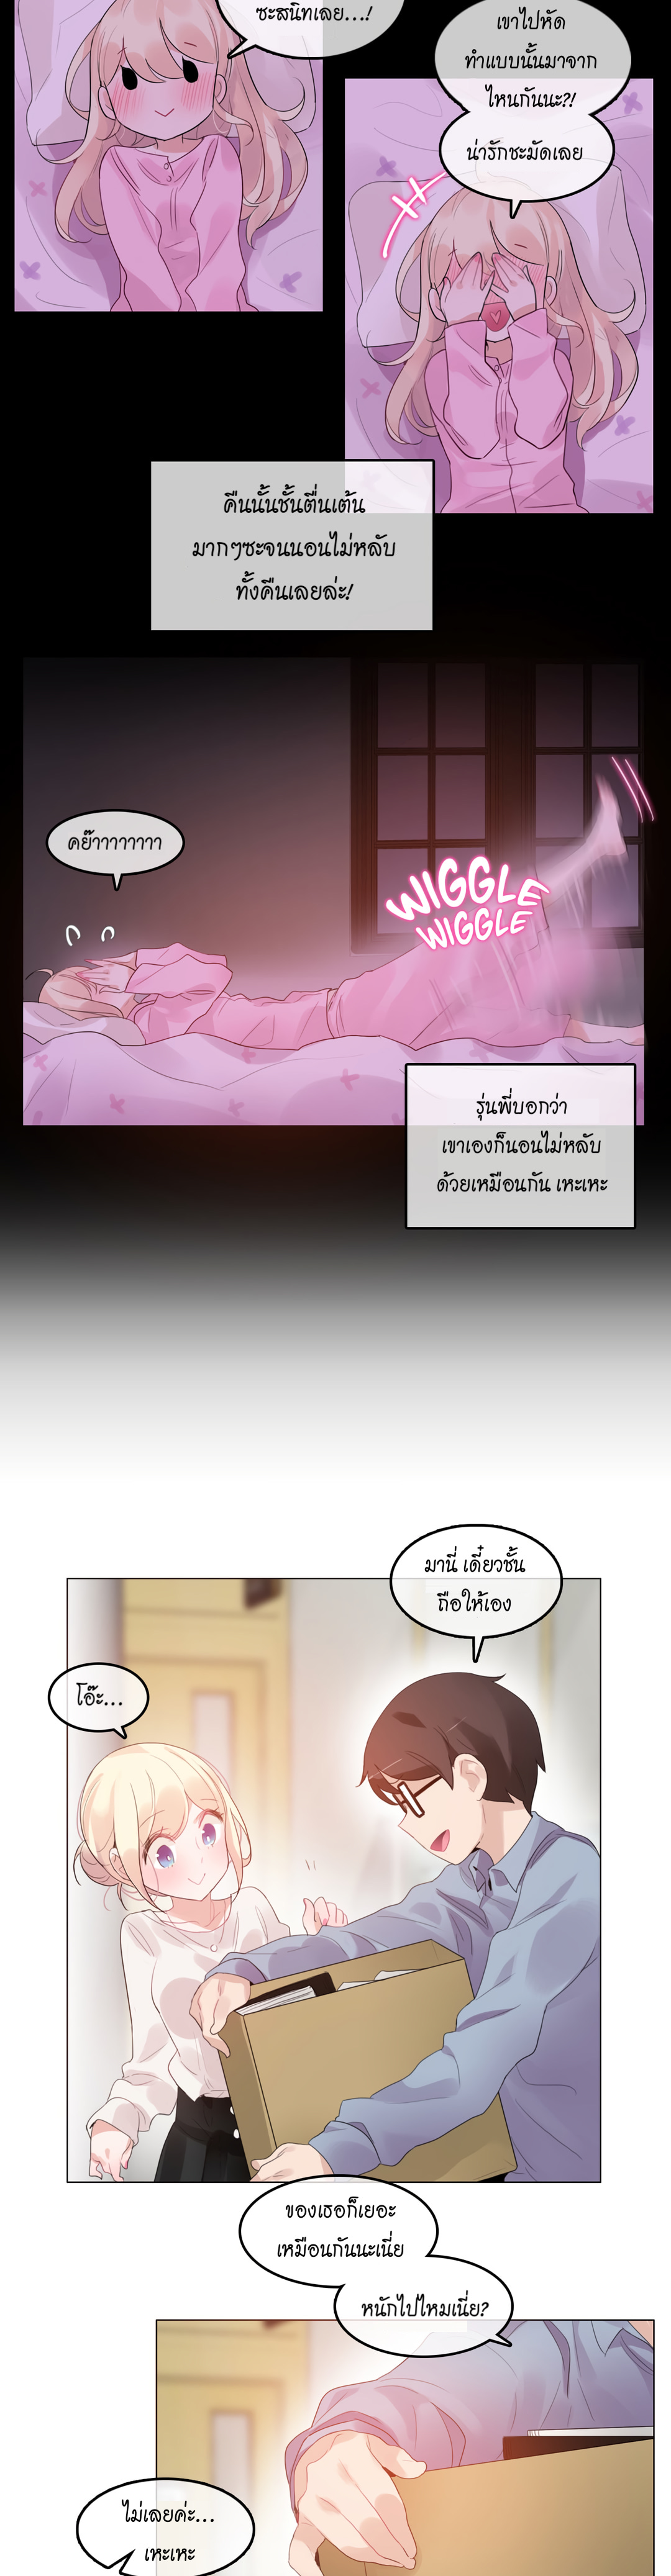 A Pervert’s Daily Life56 (4)